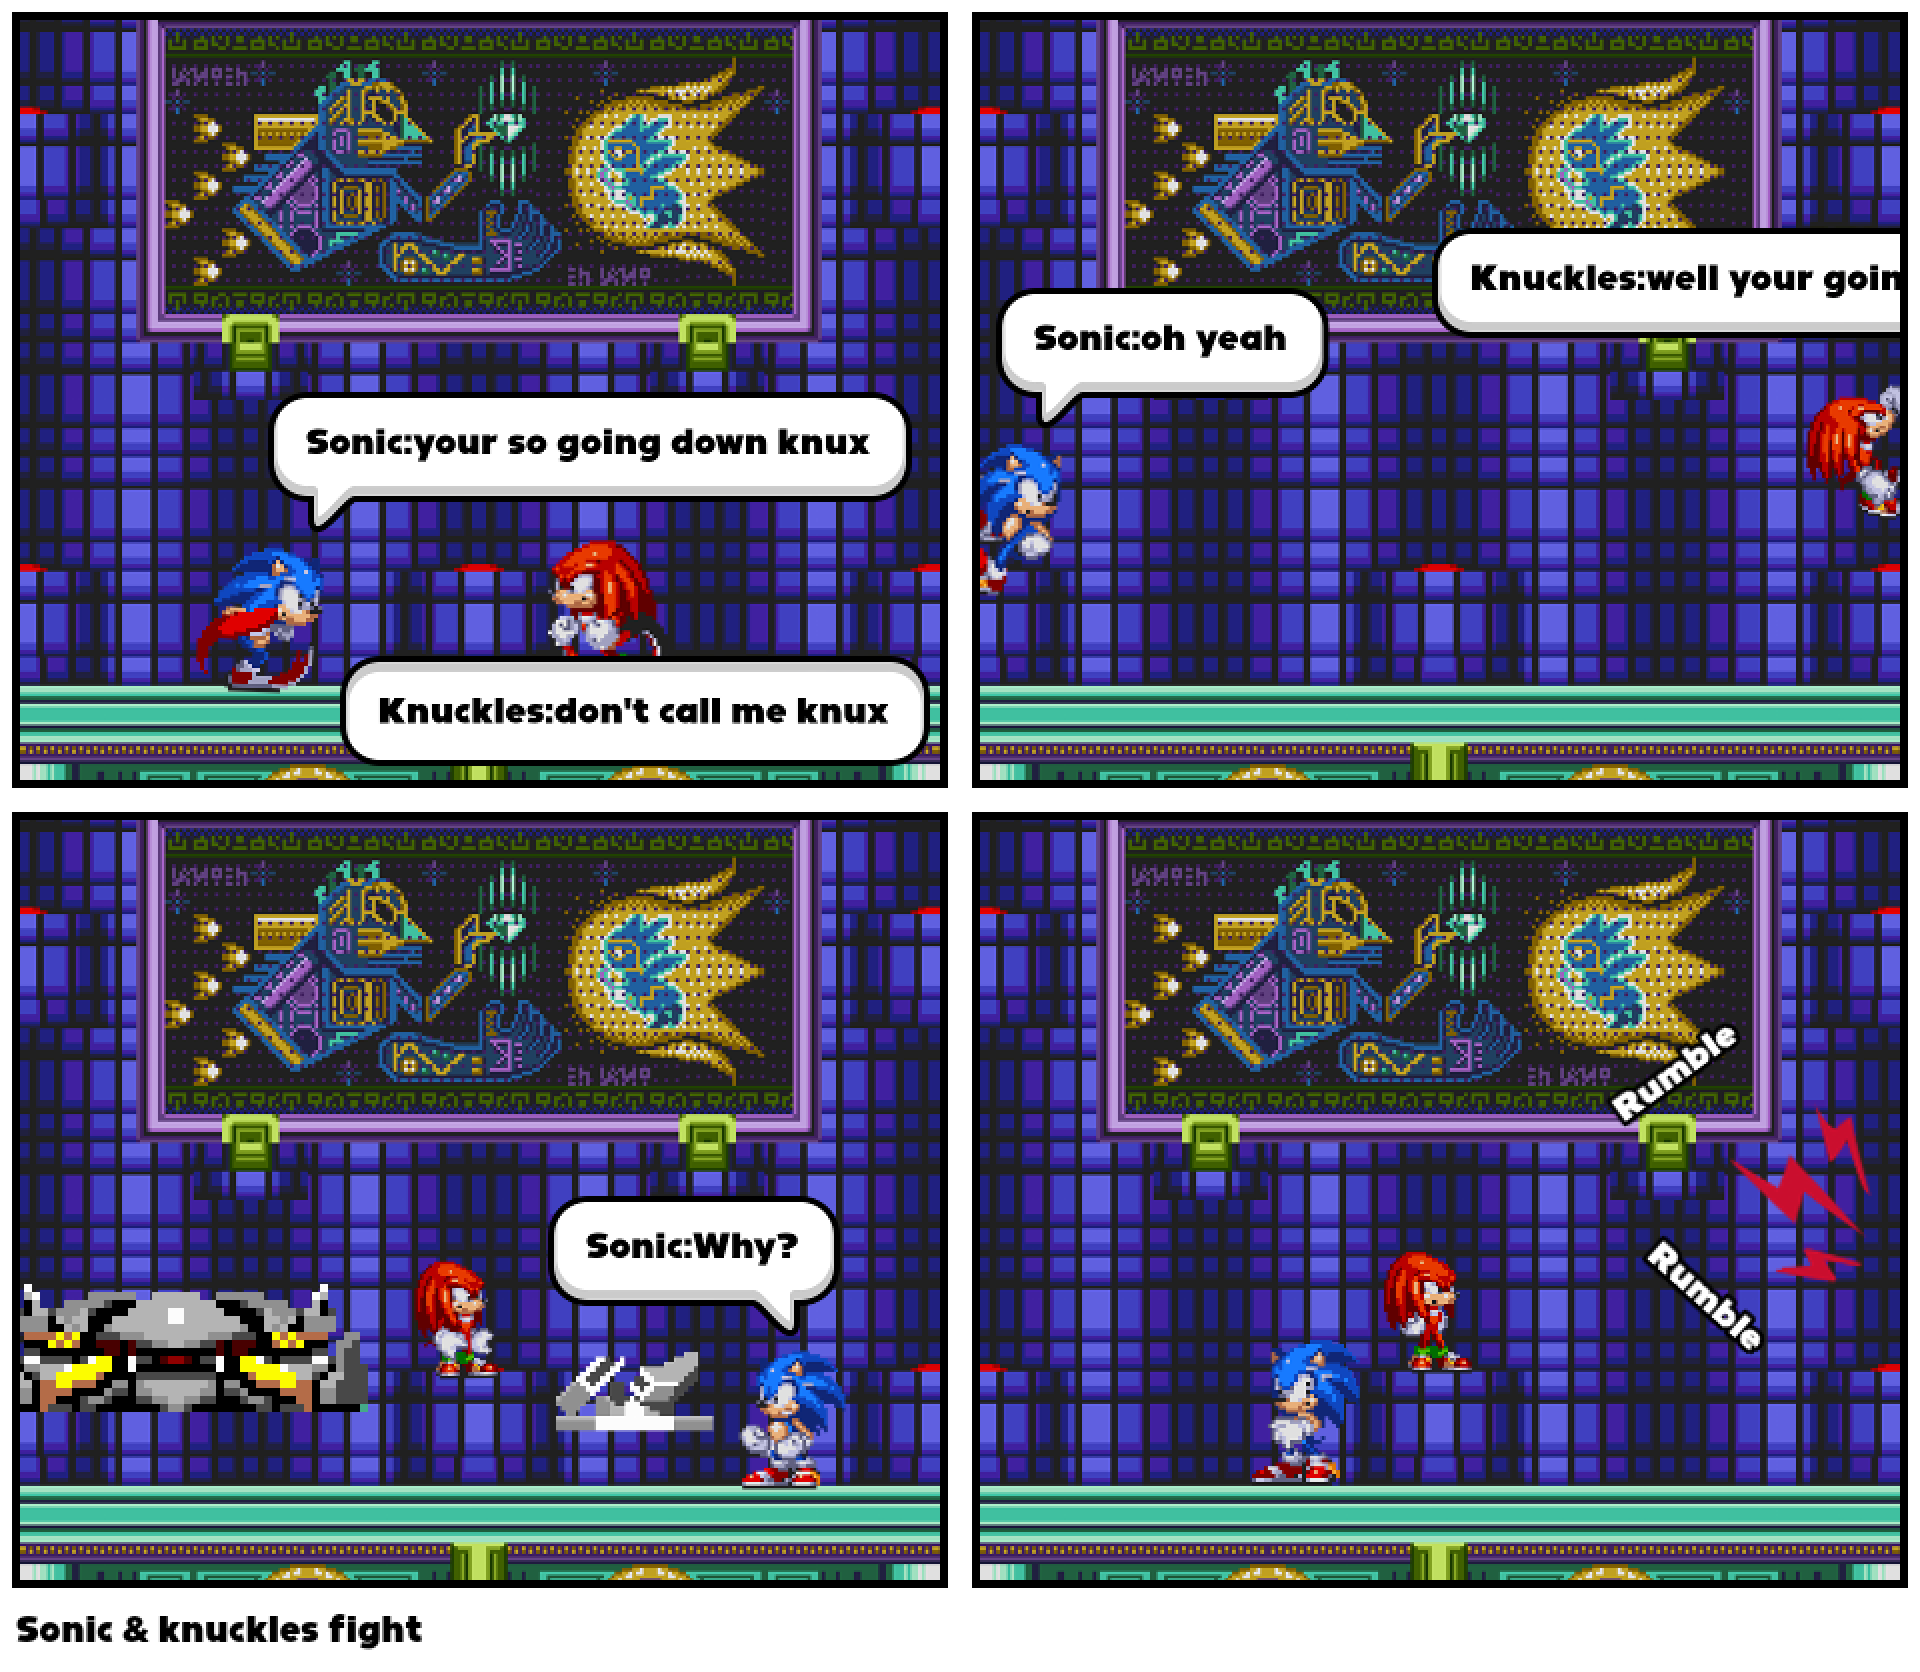 Sonic & knuckles fight